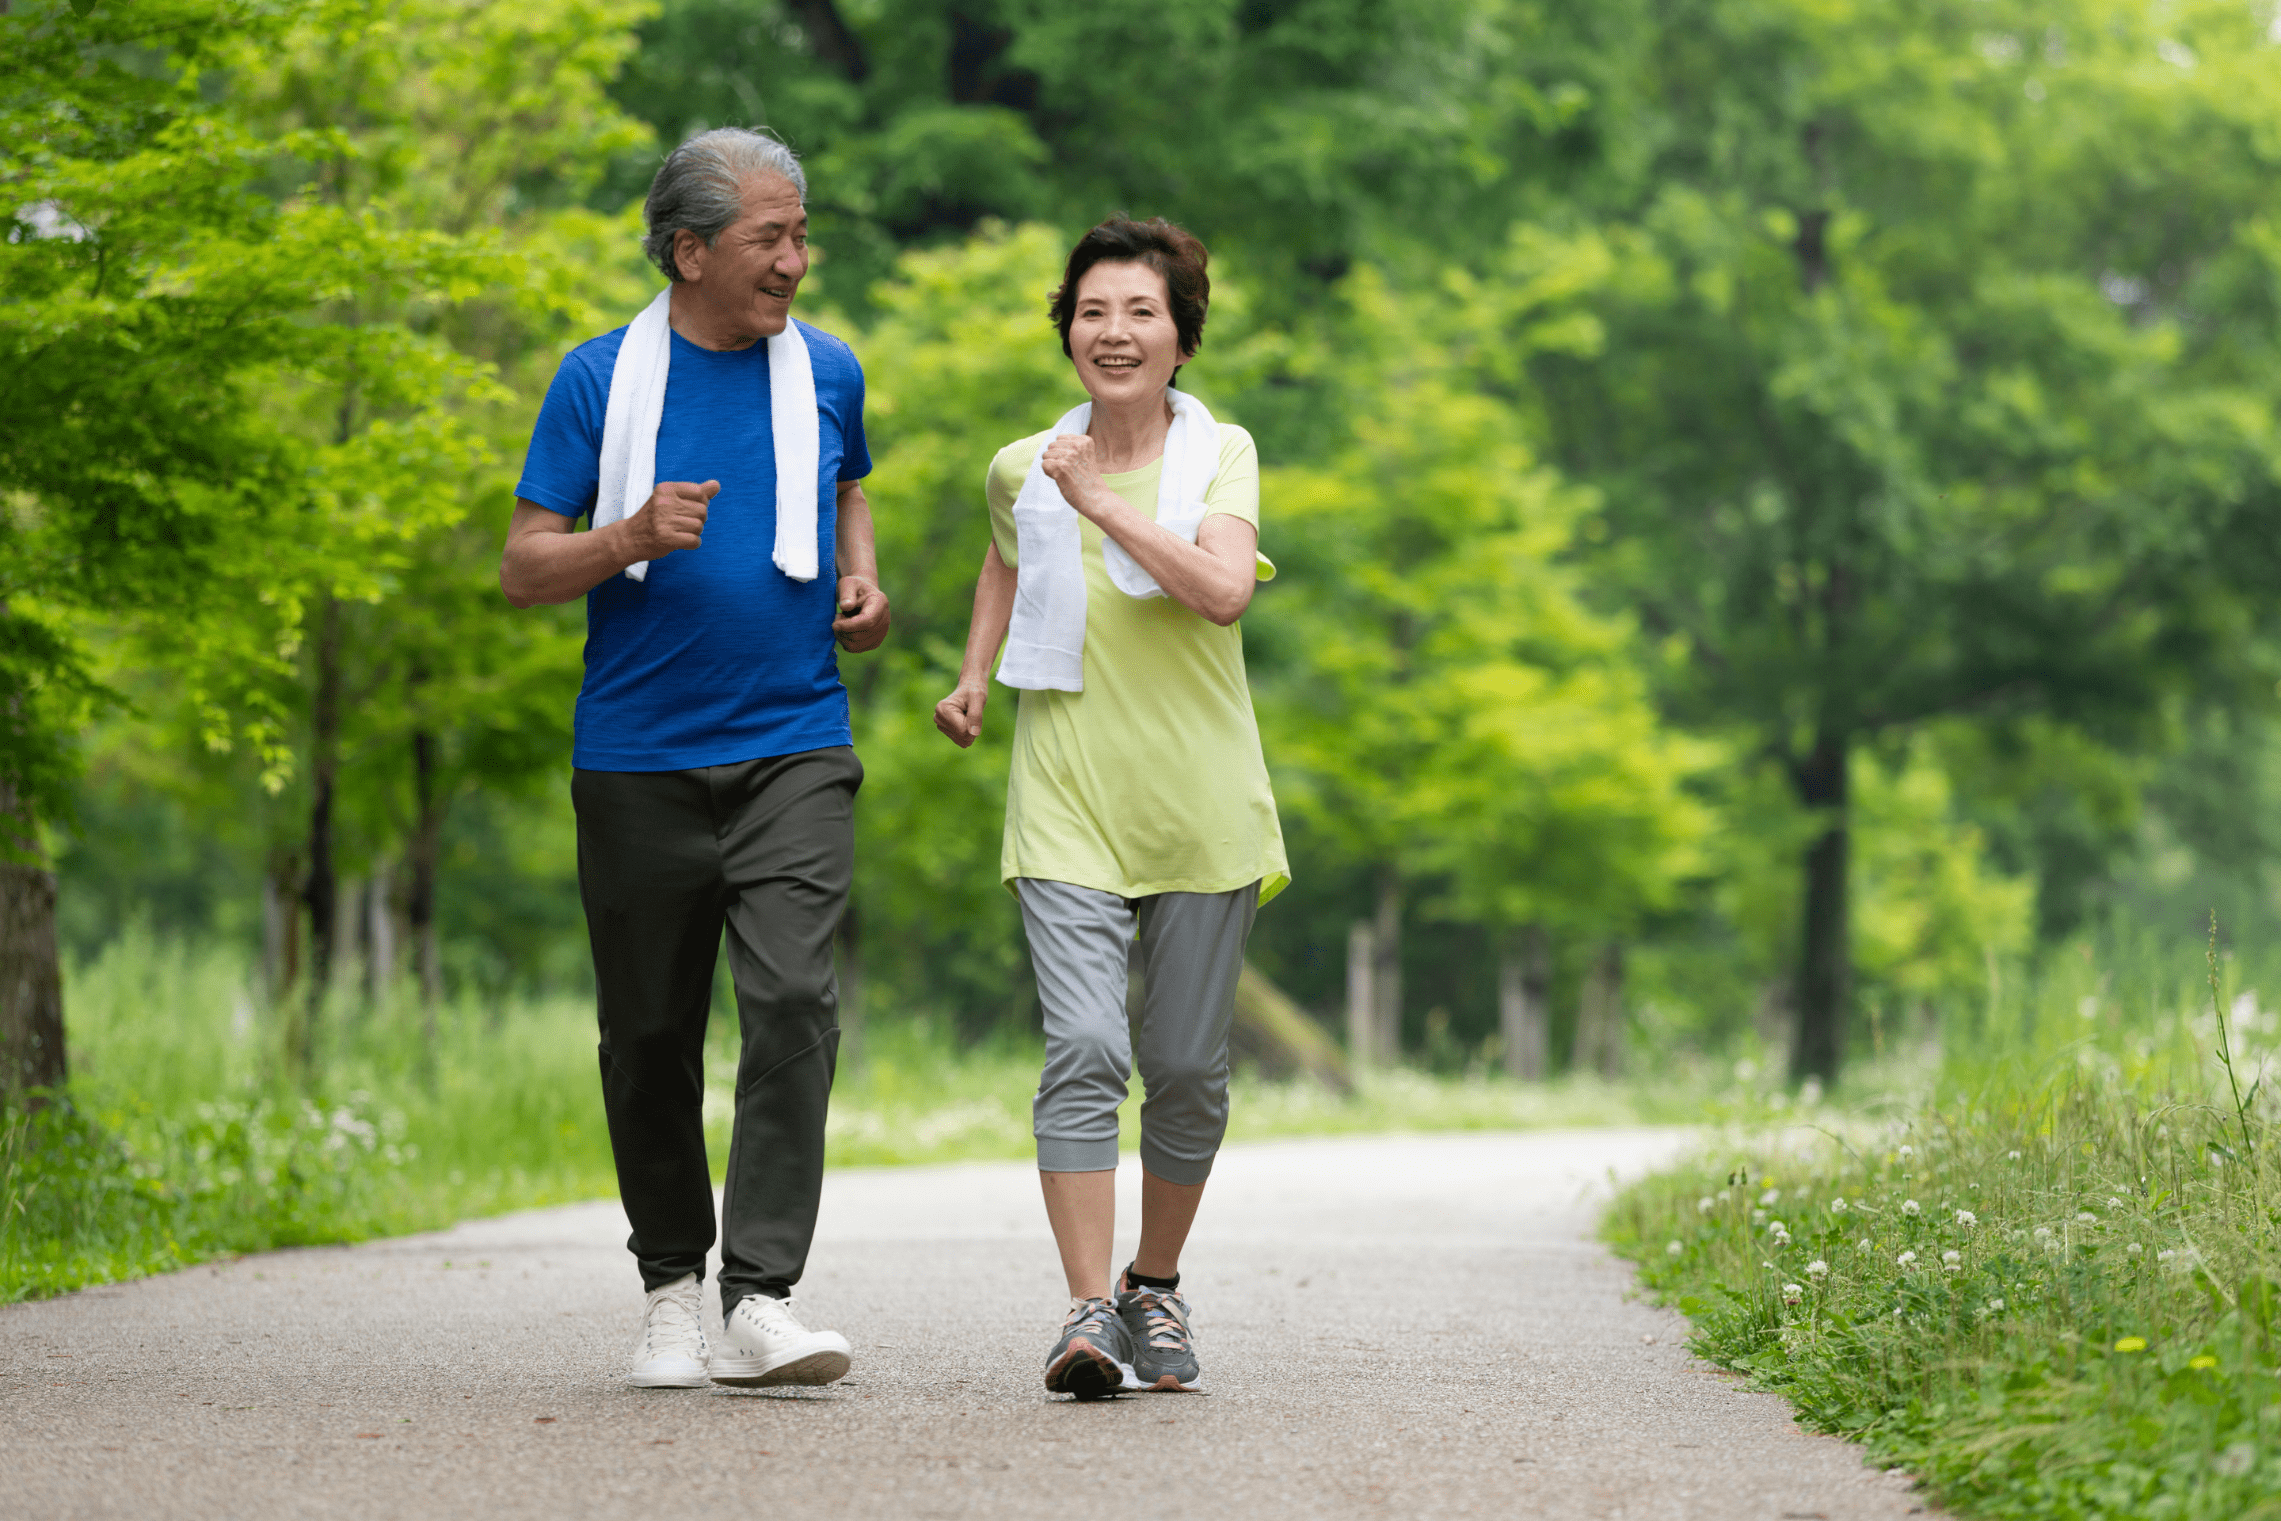 An image of an older man and woman going for a speed walk.